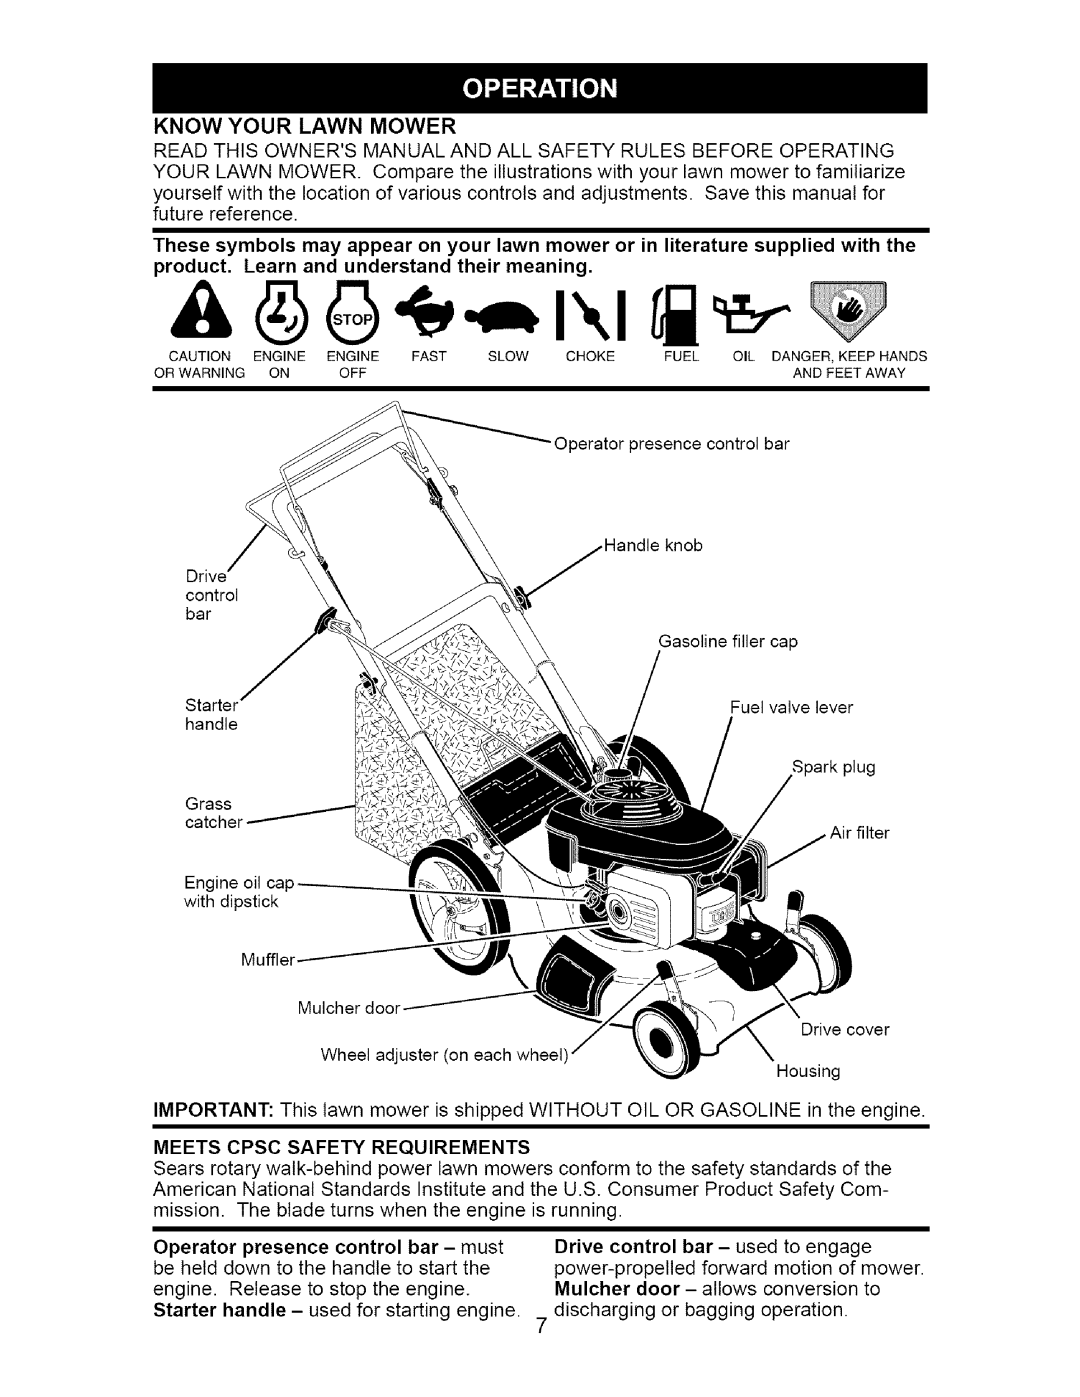 Craftsman 917.371721 Know Your Lawn Mower, product. Learn and understand their meaning, Meets Cpsc Safety Requirements 